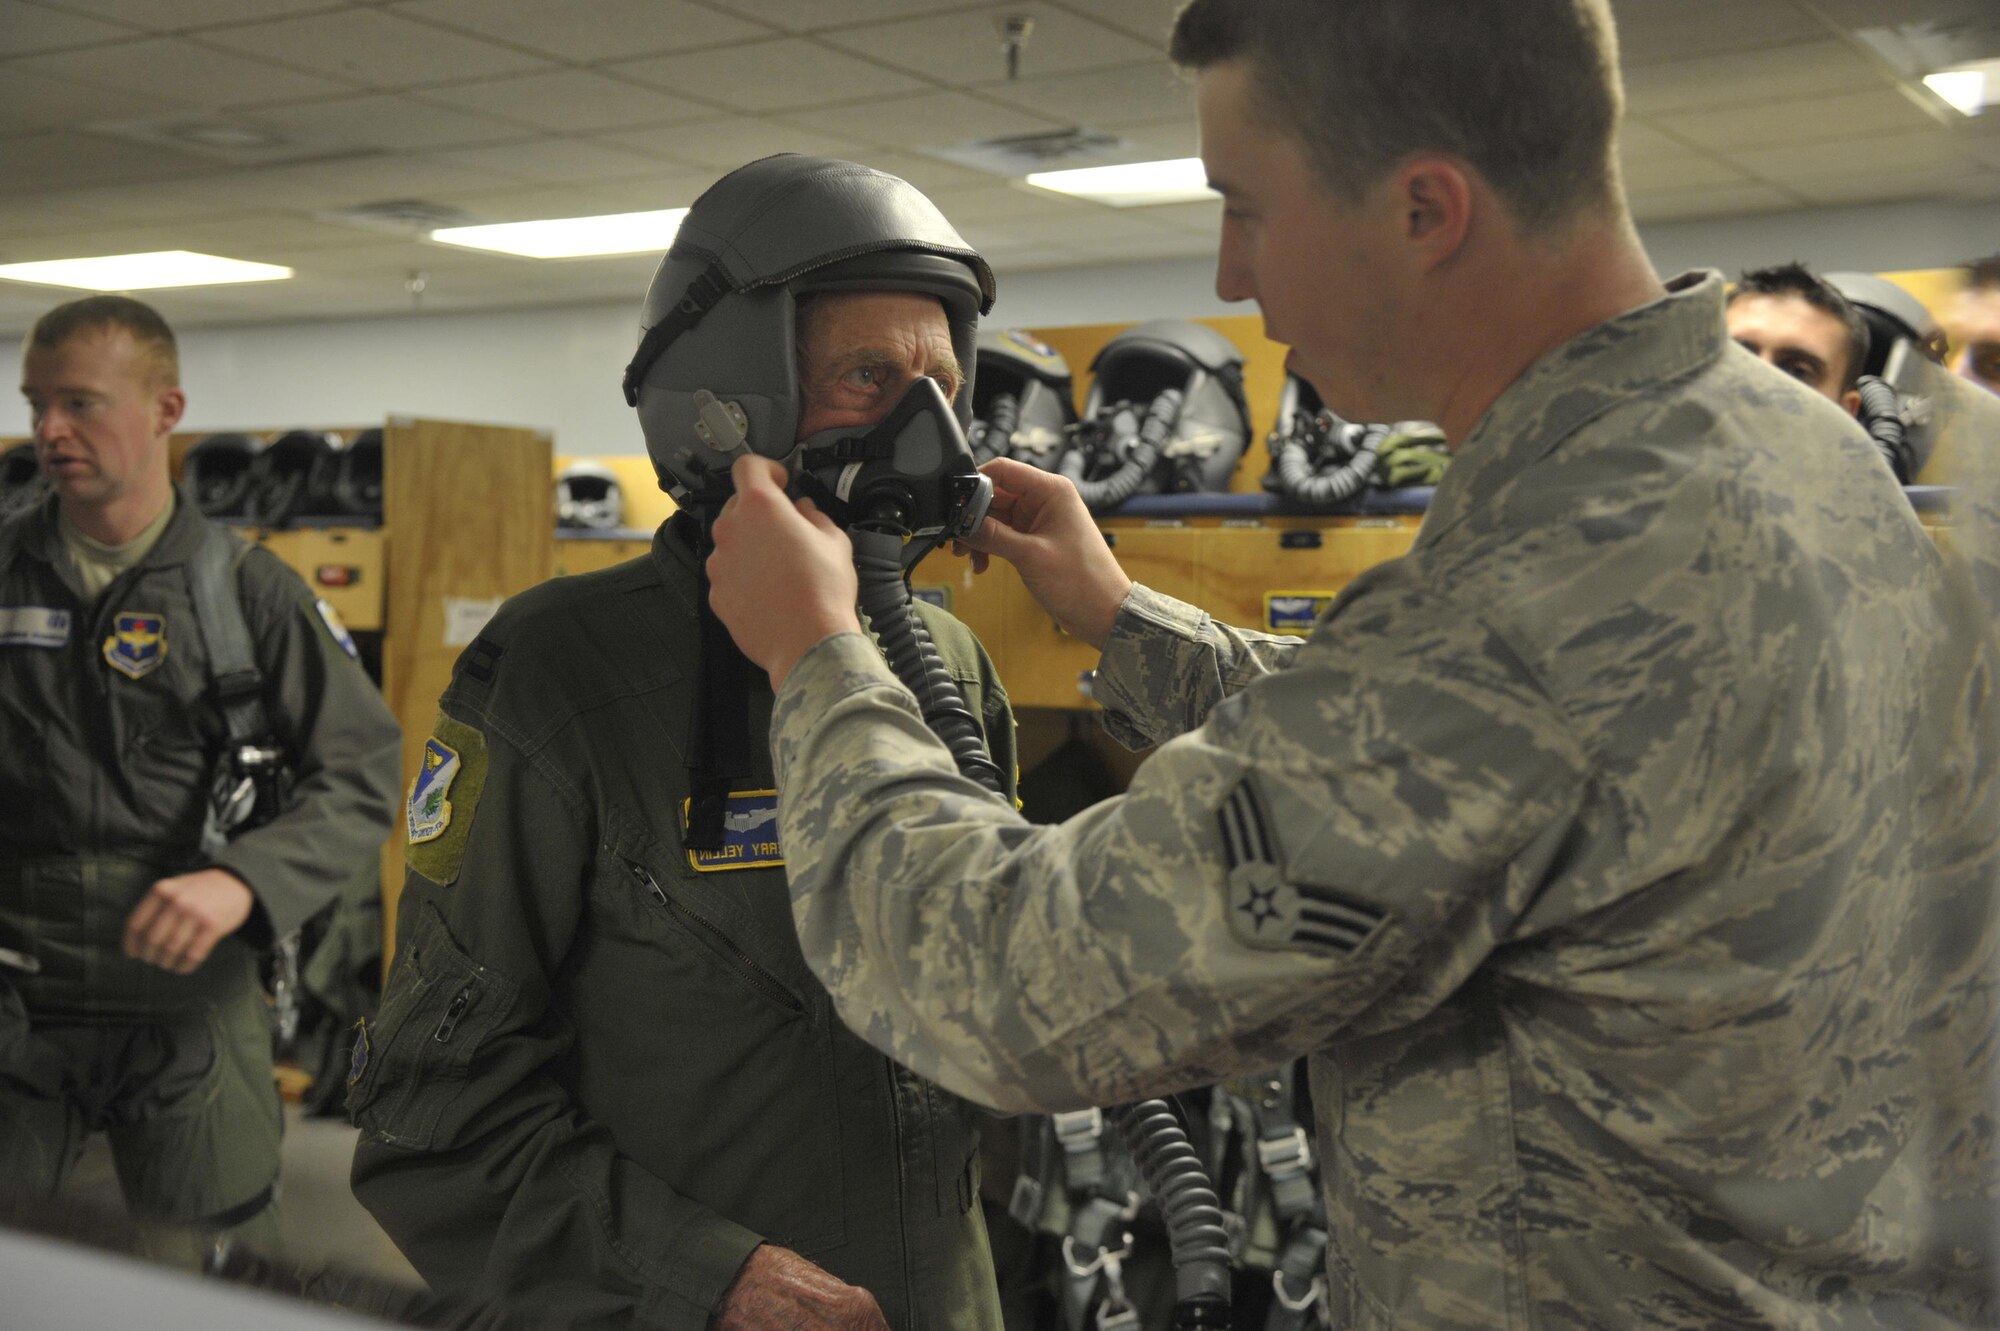 Capt. Jerry Yellin, a former U.S. Army Air Corps fighter pilot, is fitted for a helmet and face mask by Senior Airman Todd Brackenbury, 47th Operations Support Squadron, in preparation for an orientation flight at Laughlin Air Force Base, Texas, Dec. 16, 2016. Yellin, 92, enlisted two months after the bombing of Hickam Air Field and Pearl Harbor, Hawaii, on his 18th birthday. After graduating from Luke Air Field as a fighter pilot in August of 1943, he spent the remainder of the war flying P-40, P- 47 Thunderbolt and P-51 Mustang combat missions in the Pacific with the 78th Fighter Squadron, known as the "Bushmasters," signified by the open-mouth snake’s head worn on their patches. (U.S. Air Force photo/Tech. Sgt. Mike Meares)